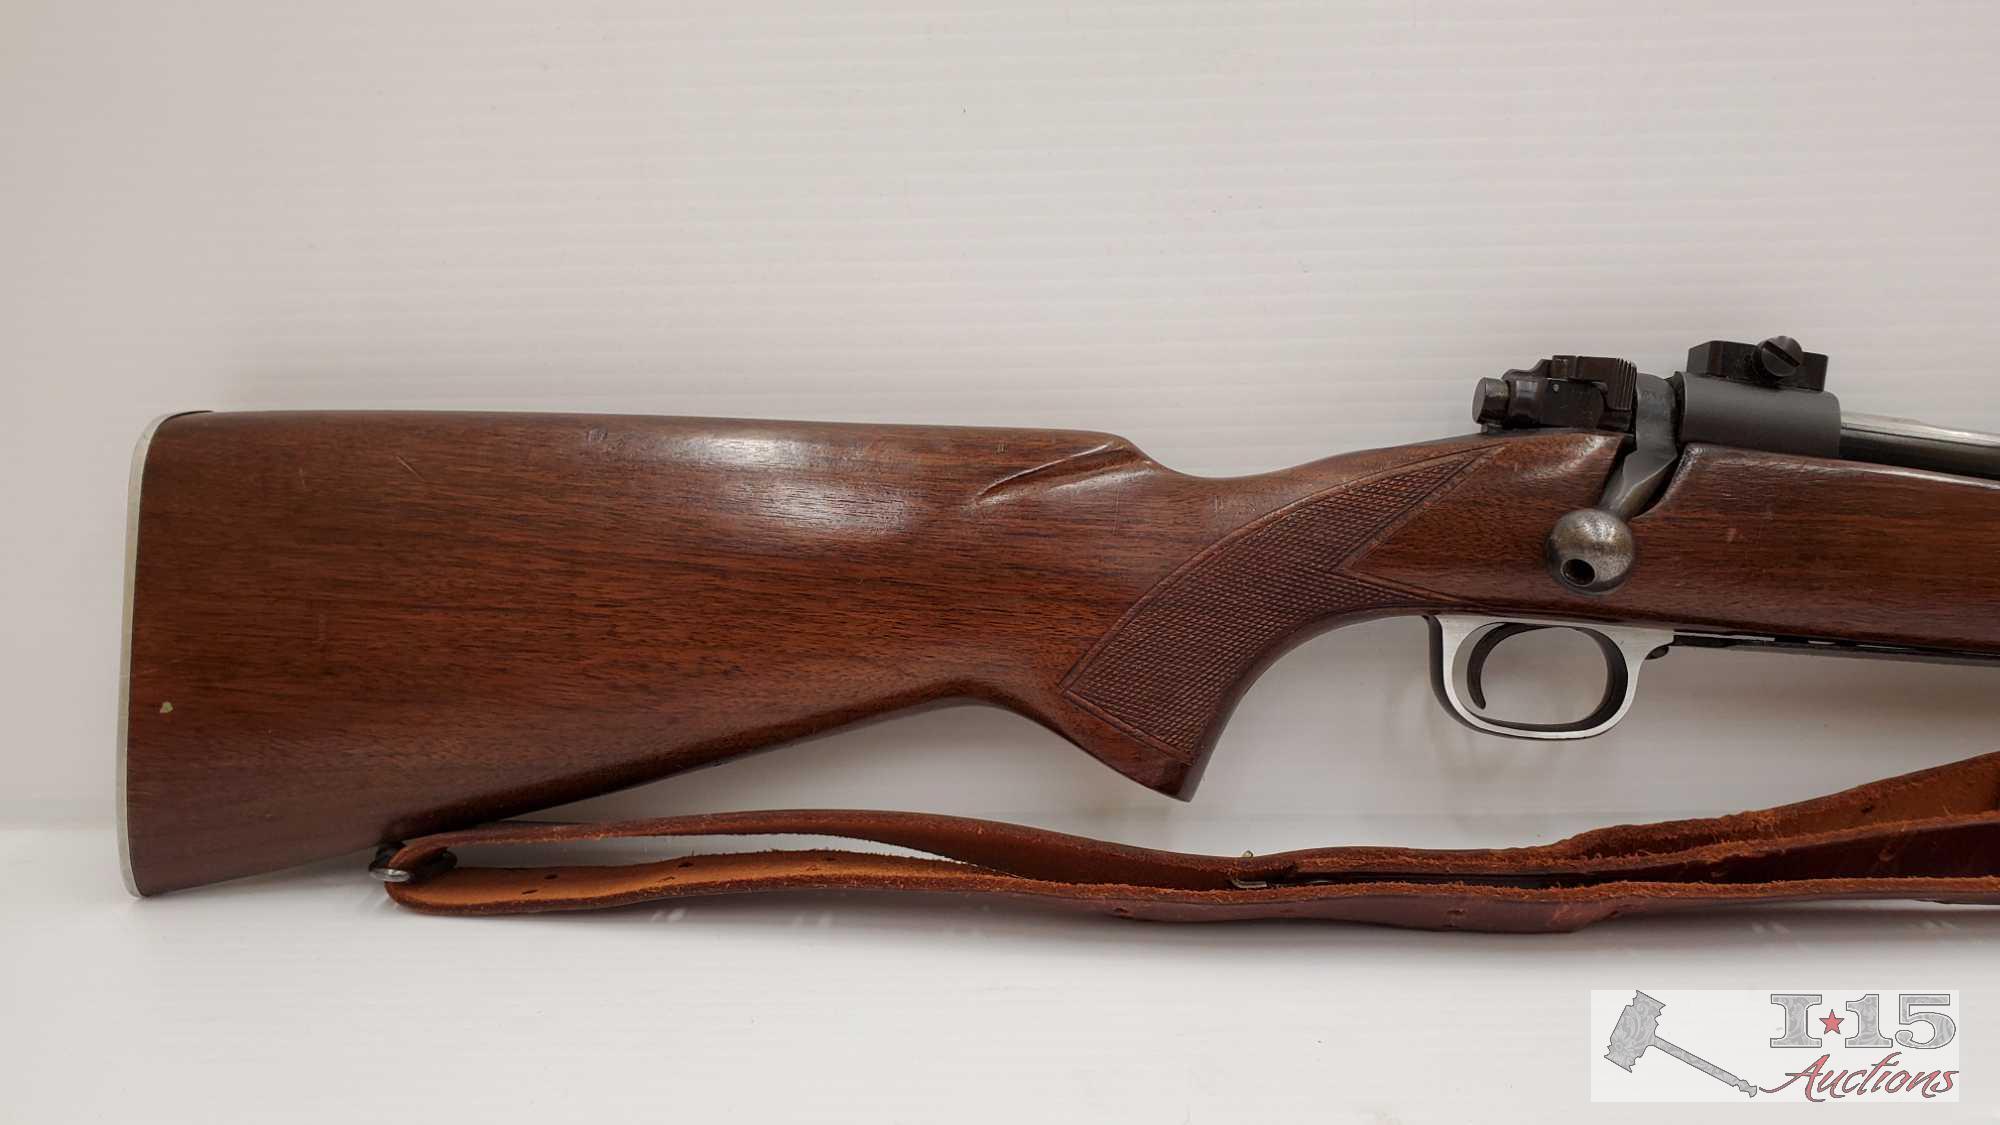 Winchester Model 70 Featherweight .270 Win Bolt Action Rifle